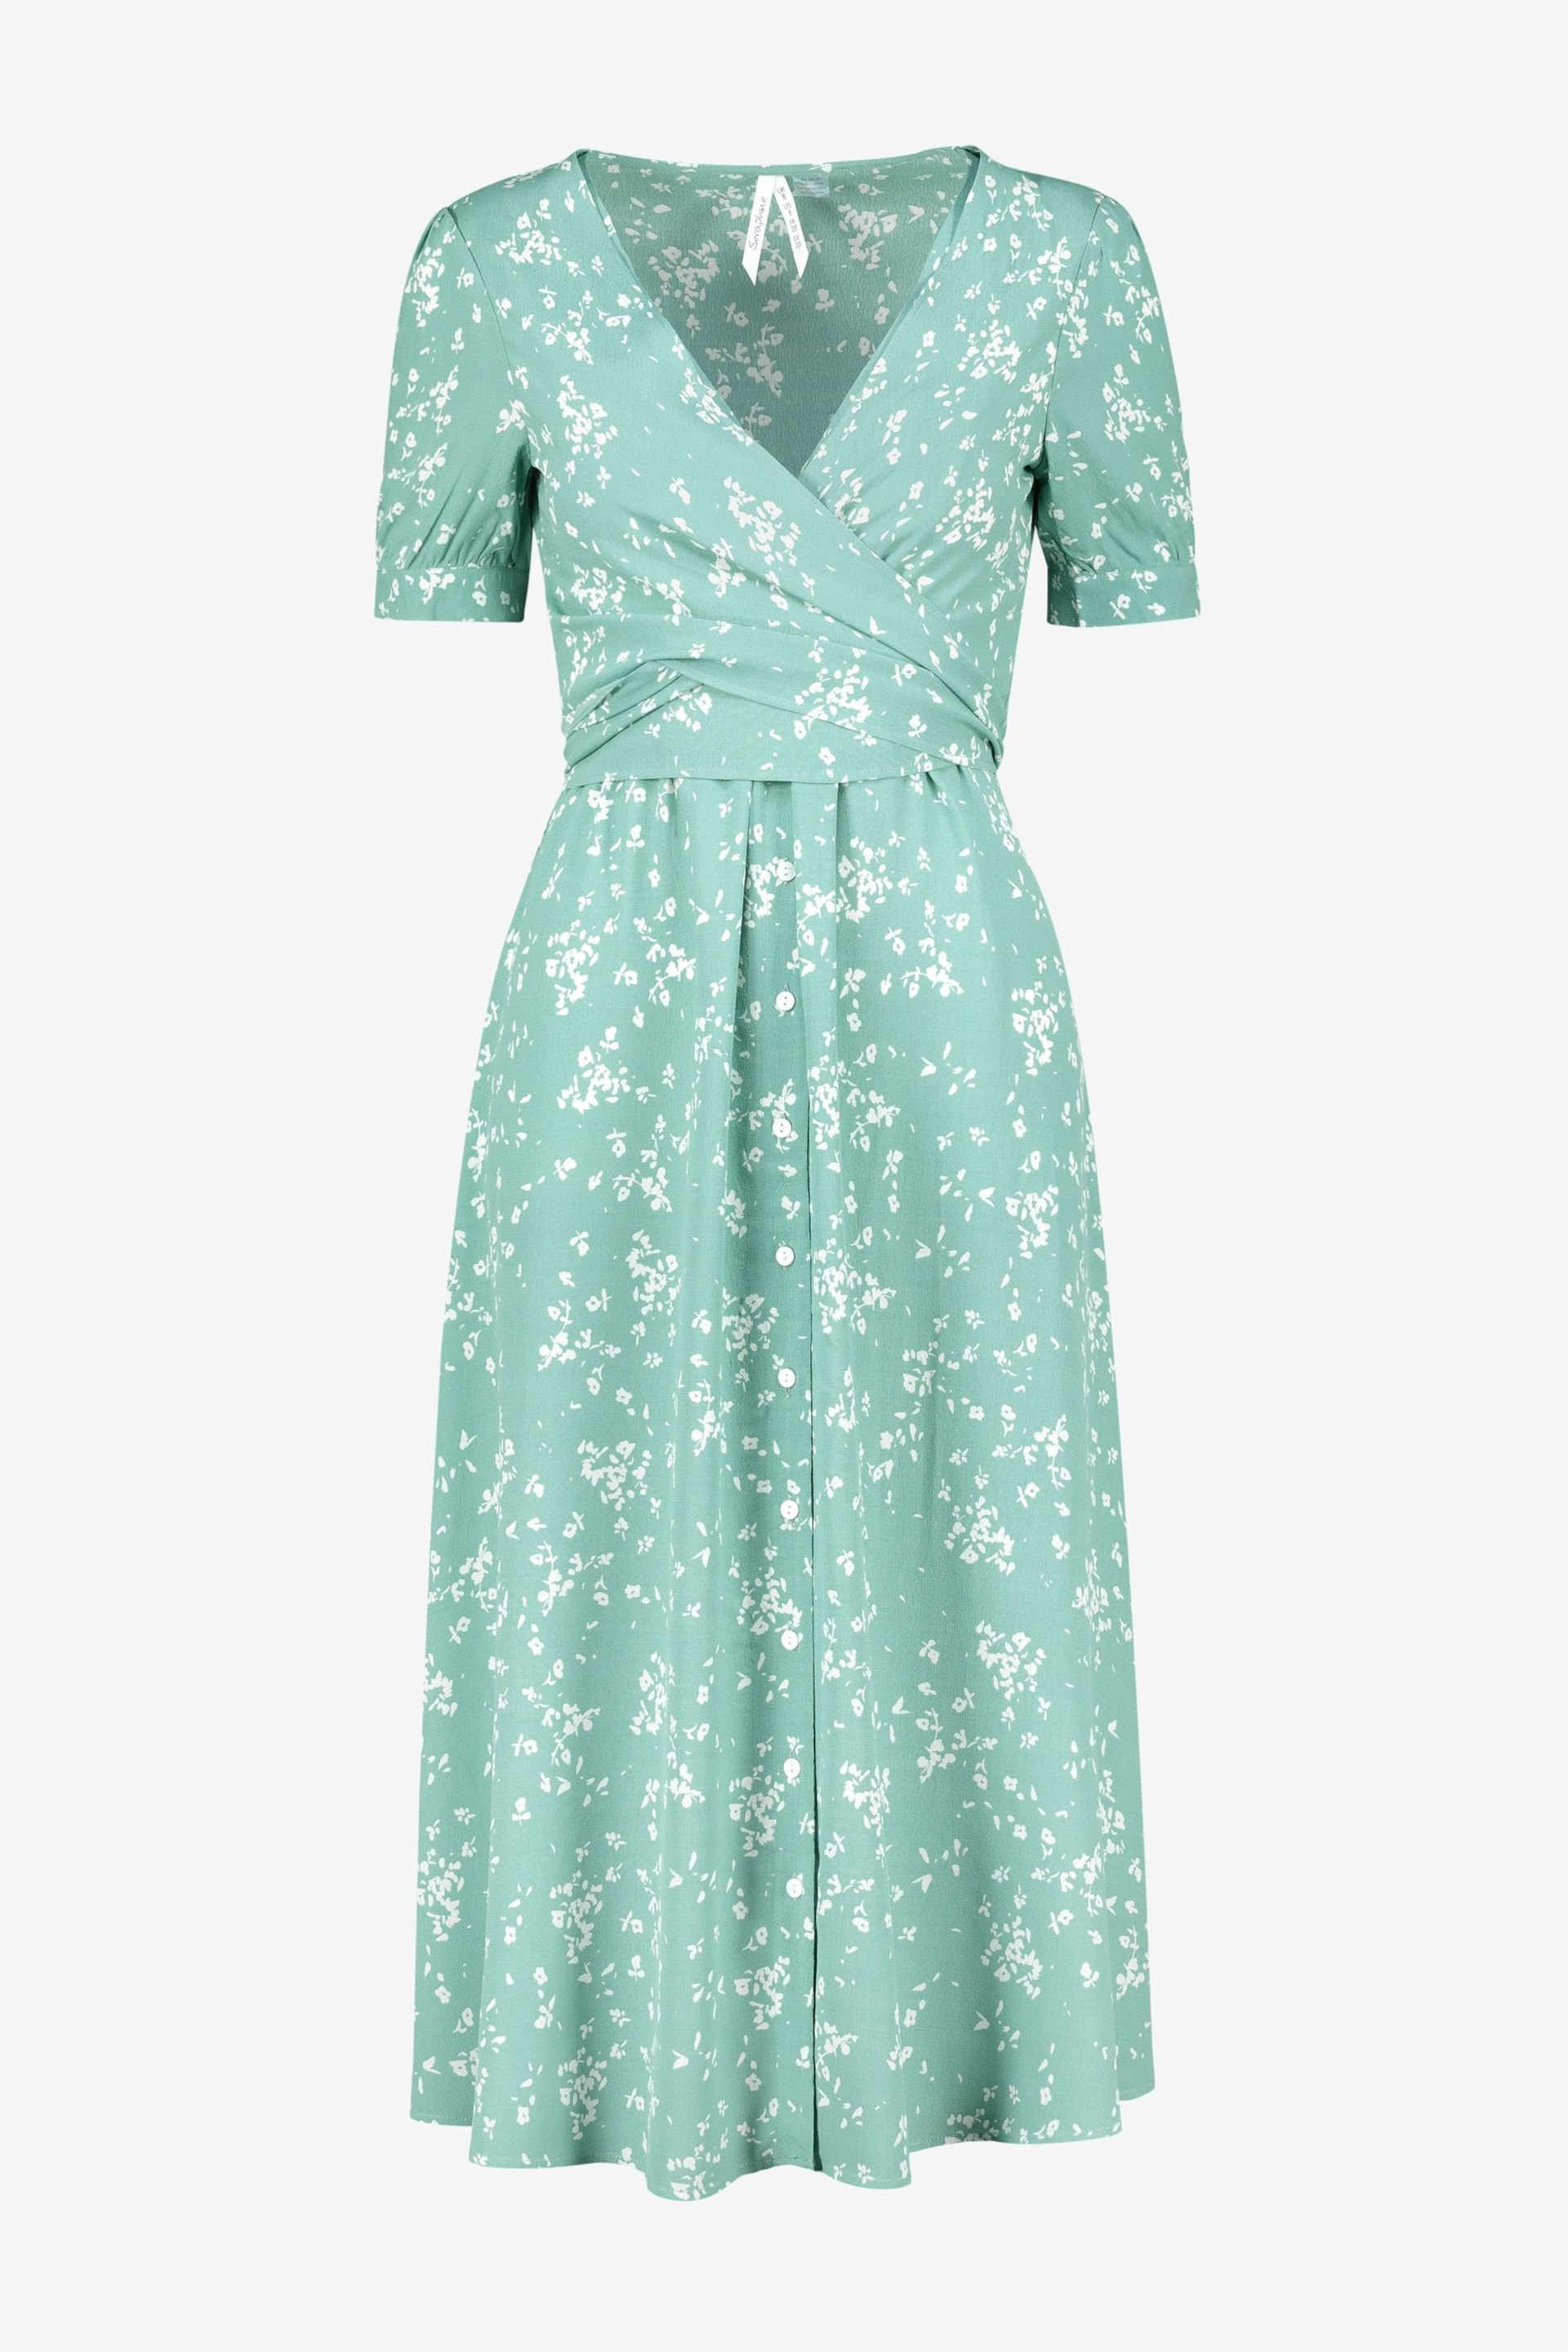 Seraphine Sage Green Floral Maternity And Nursing Midi Dress - Image 5 of 5